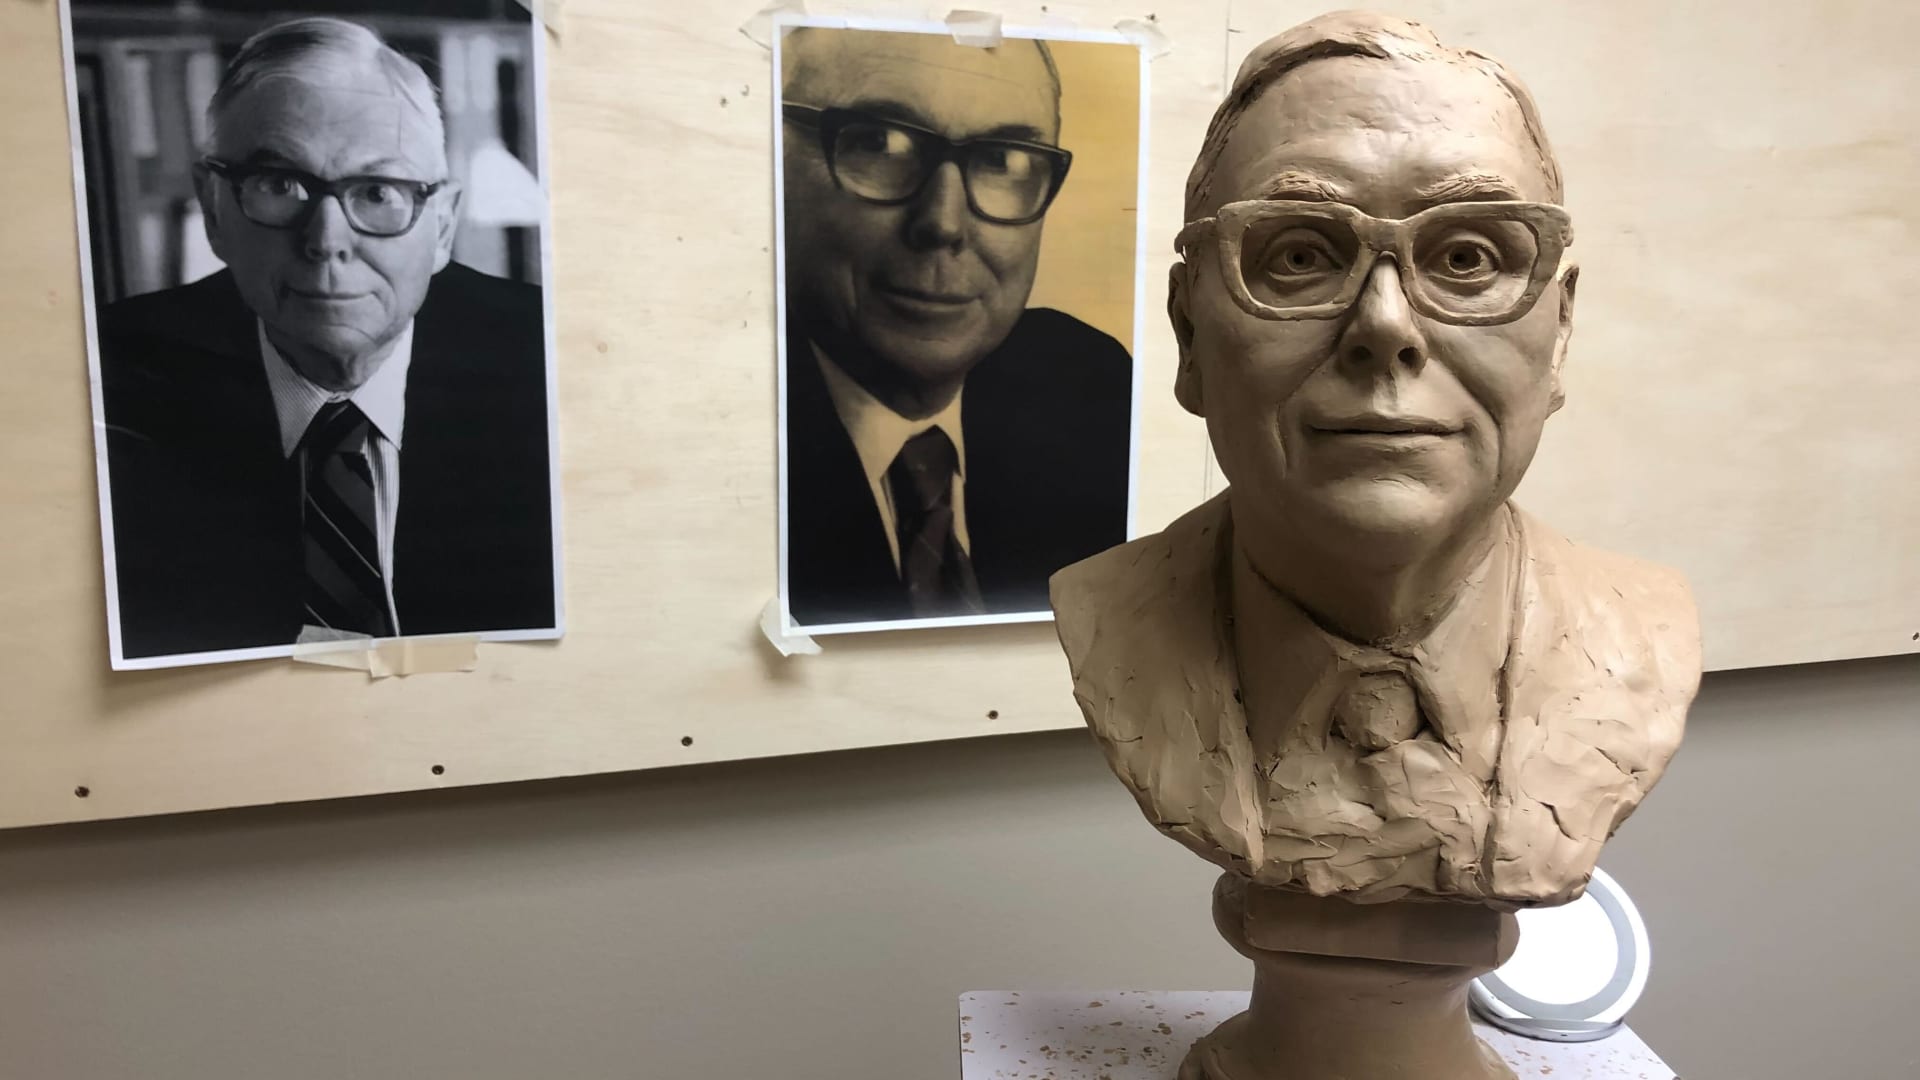 Bronze bust honoring the late Charlie Munger wowed crowd in Omaha at Berkshire assembly